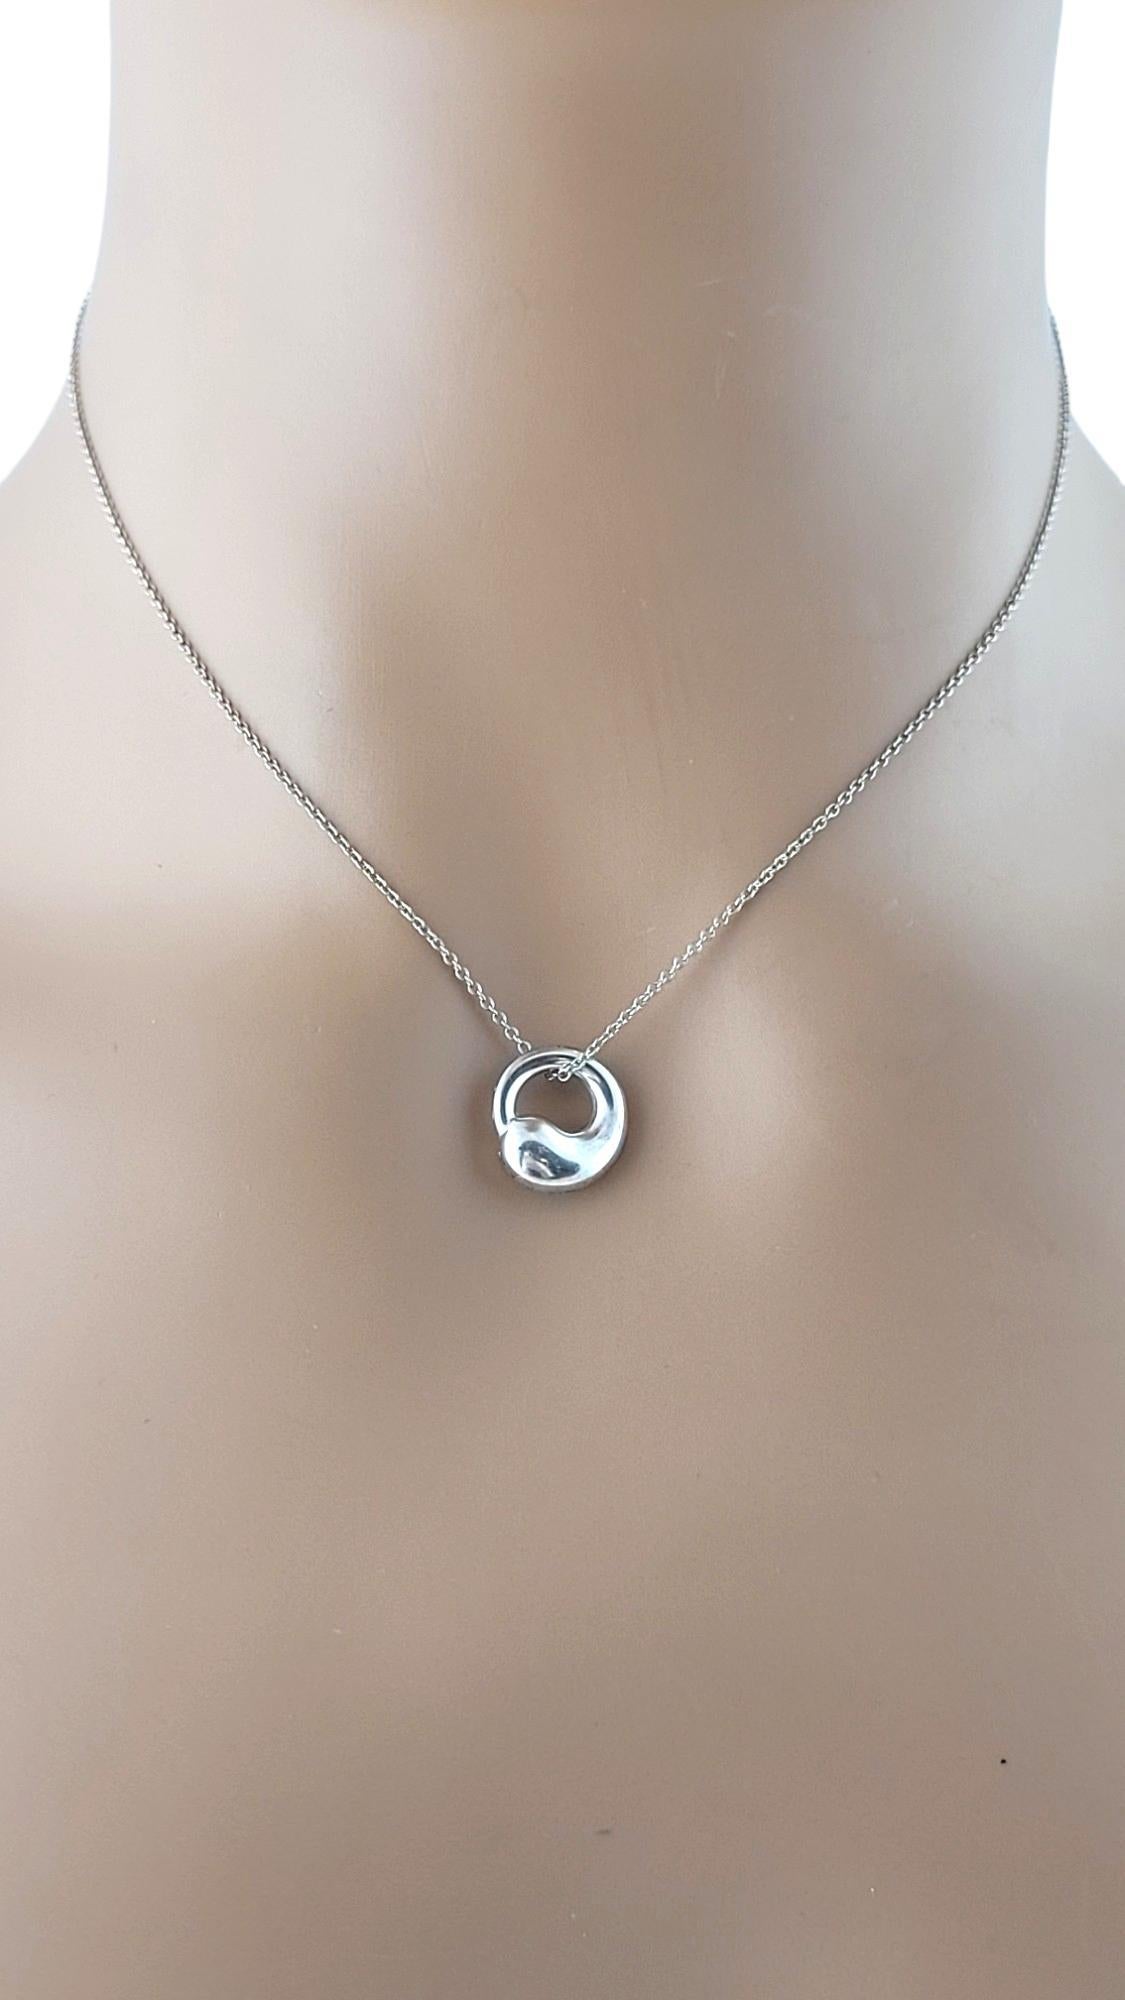 Tiffany & Co. Sterling Silver Eternal Circle Necklace #17402 4